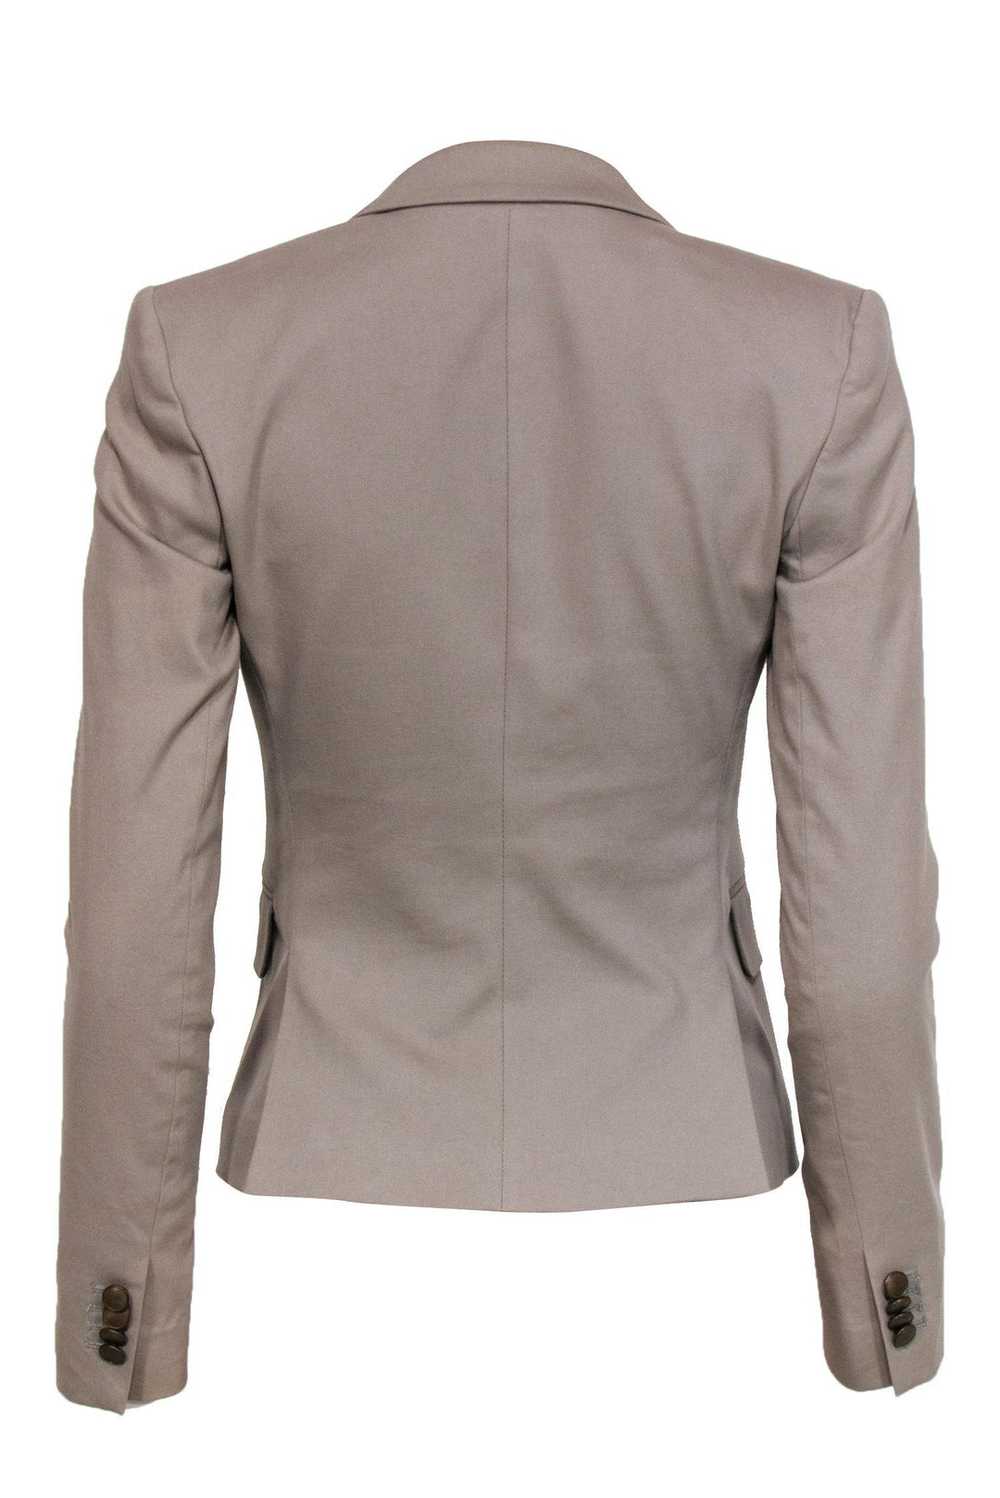 Theory - Taupe Double Breasted Blazer Sz 00 - image 3